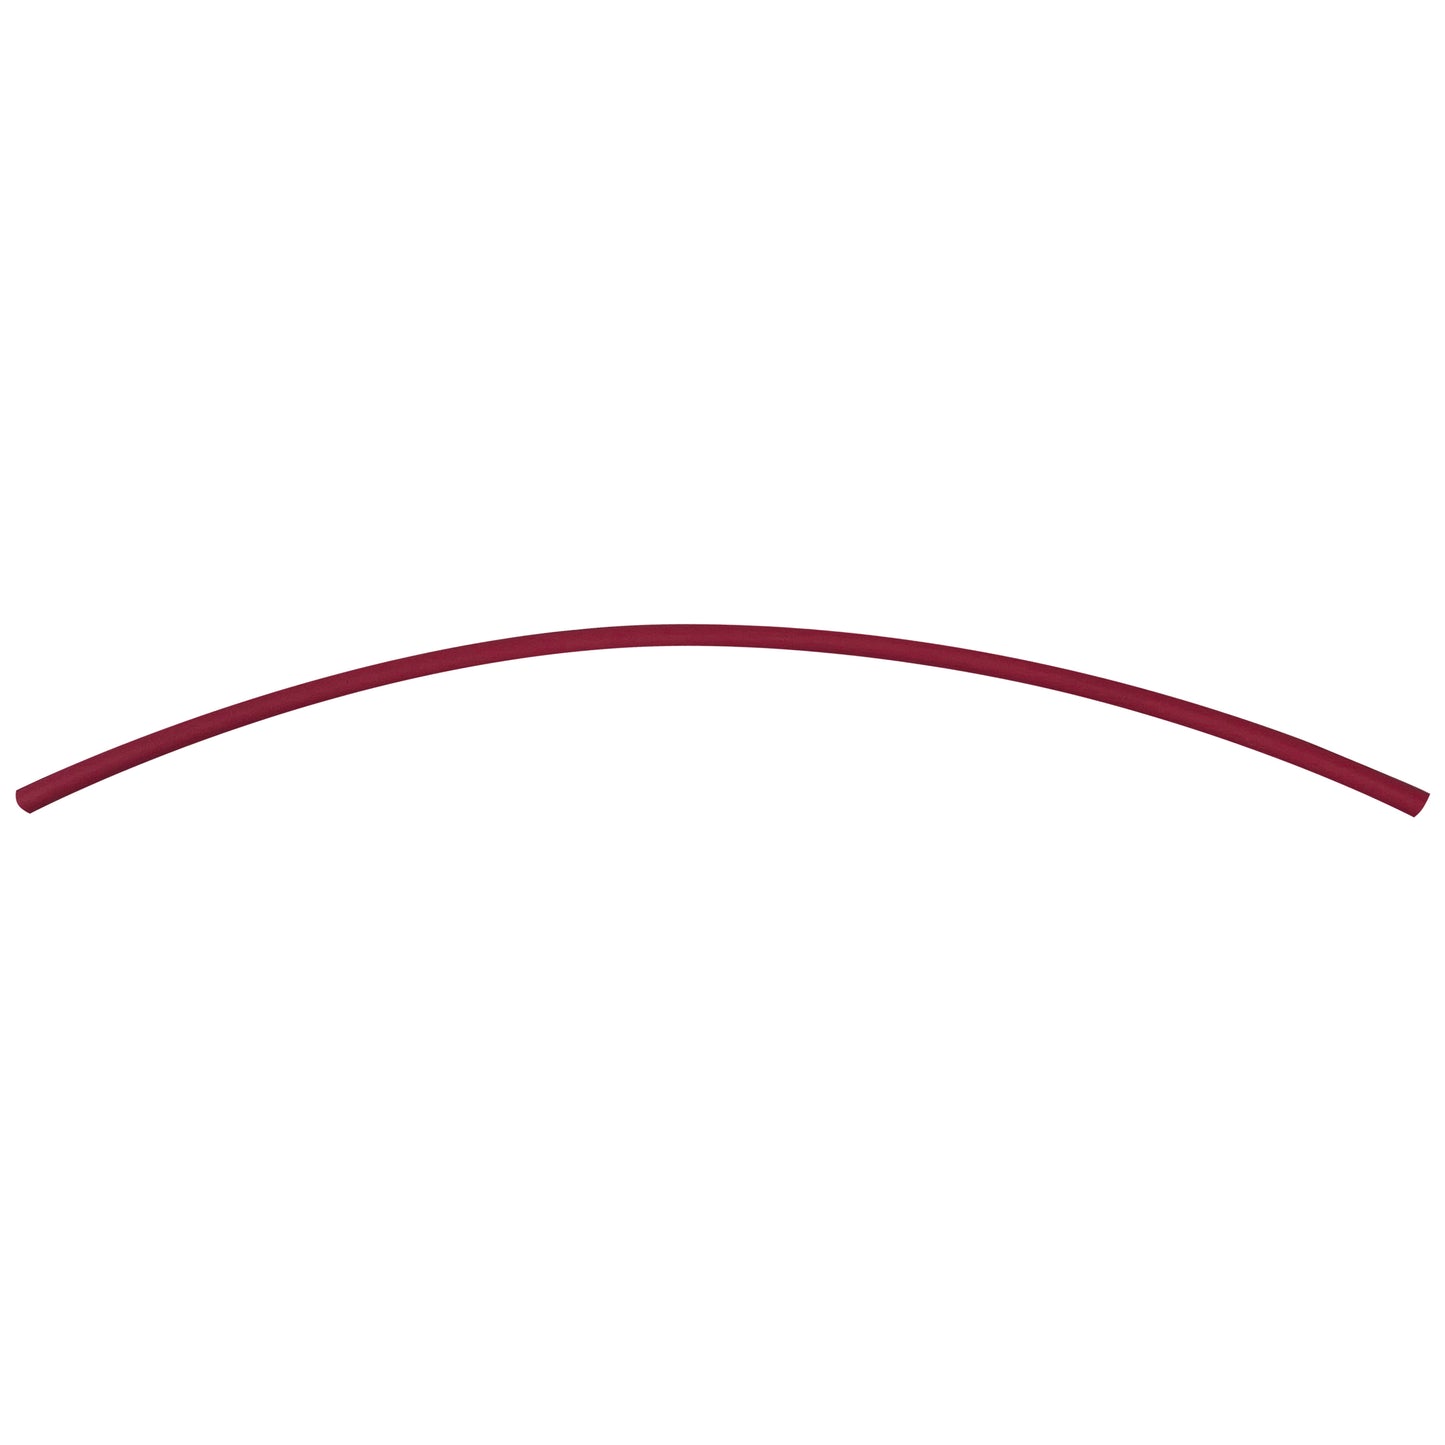 Flexible Thin Single Wall Non-Adhesive Heat Shrink Tubing 2:1 Red 3/32" ID - 12" Inch 10 Pack